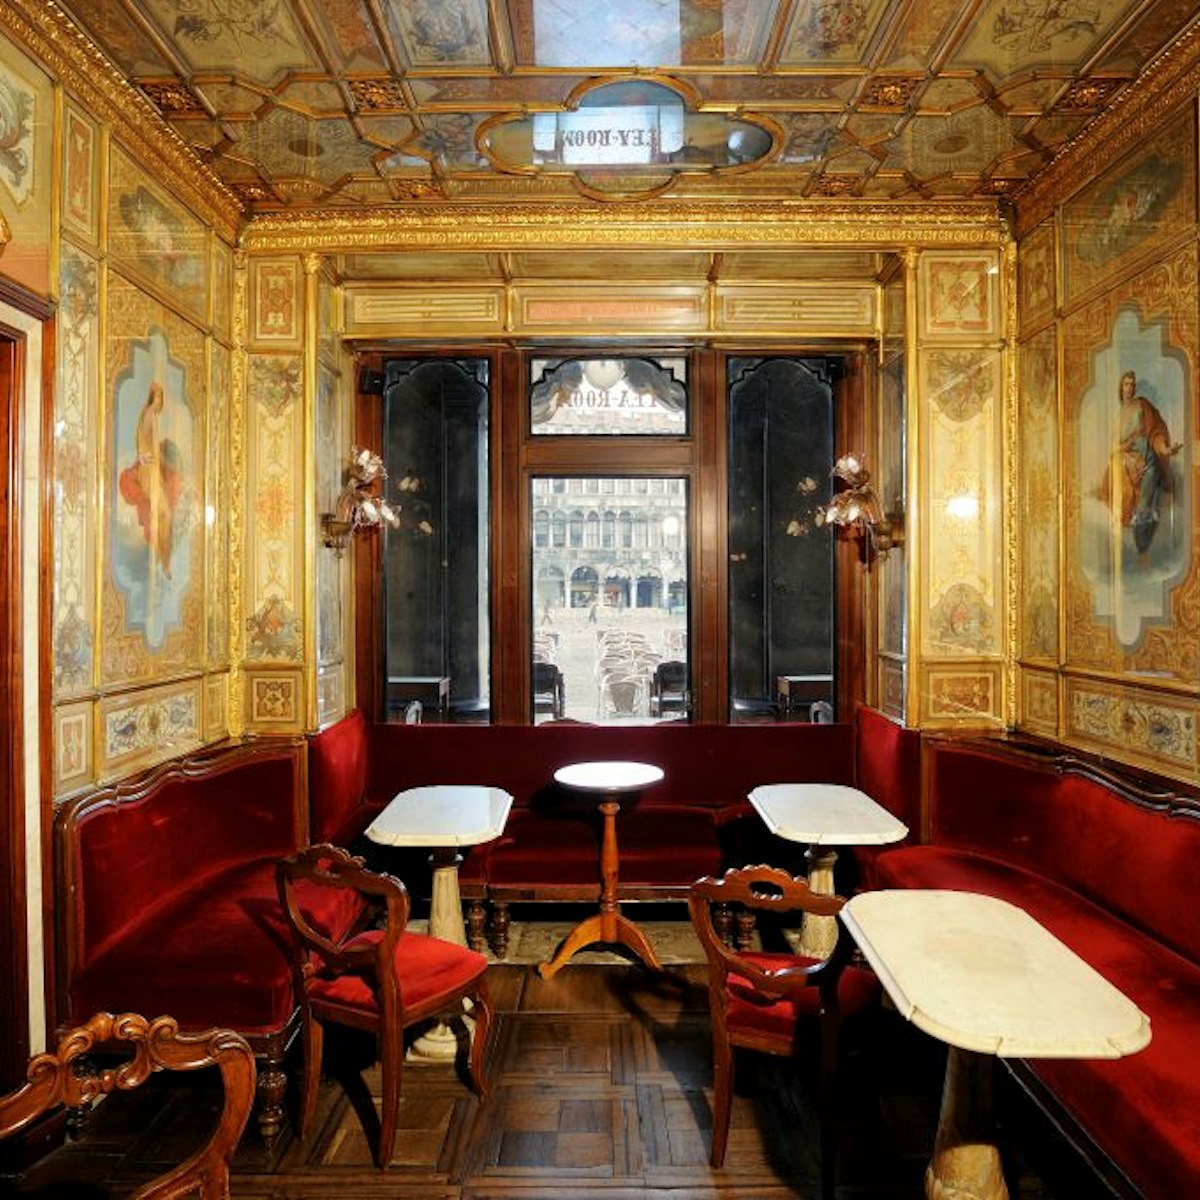 Caffè Florian Neo-Baroque splendor & modern art at an iconic 1700s cafe, turning out coffee, cocktails & snacks.